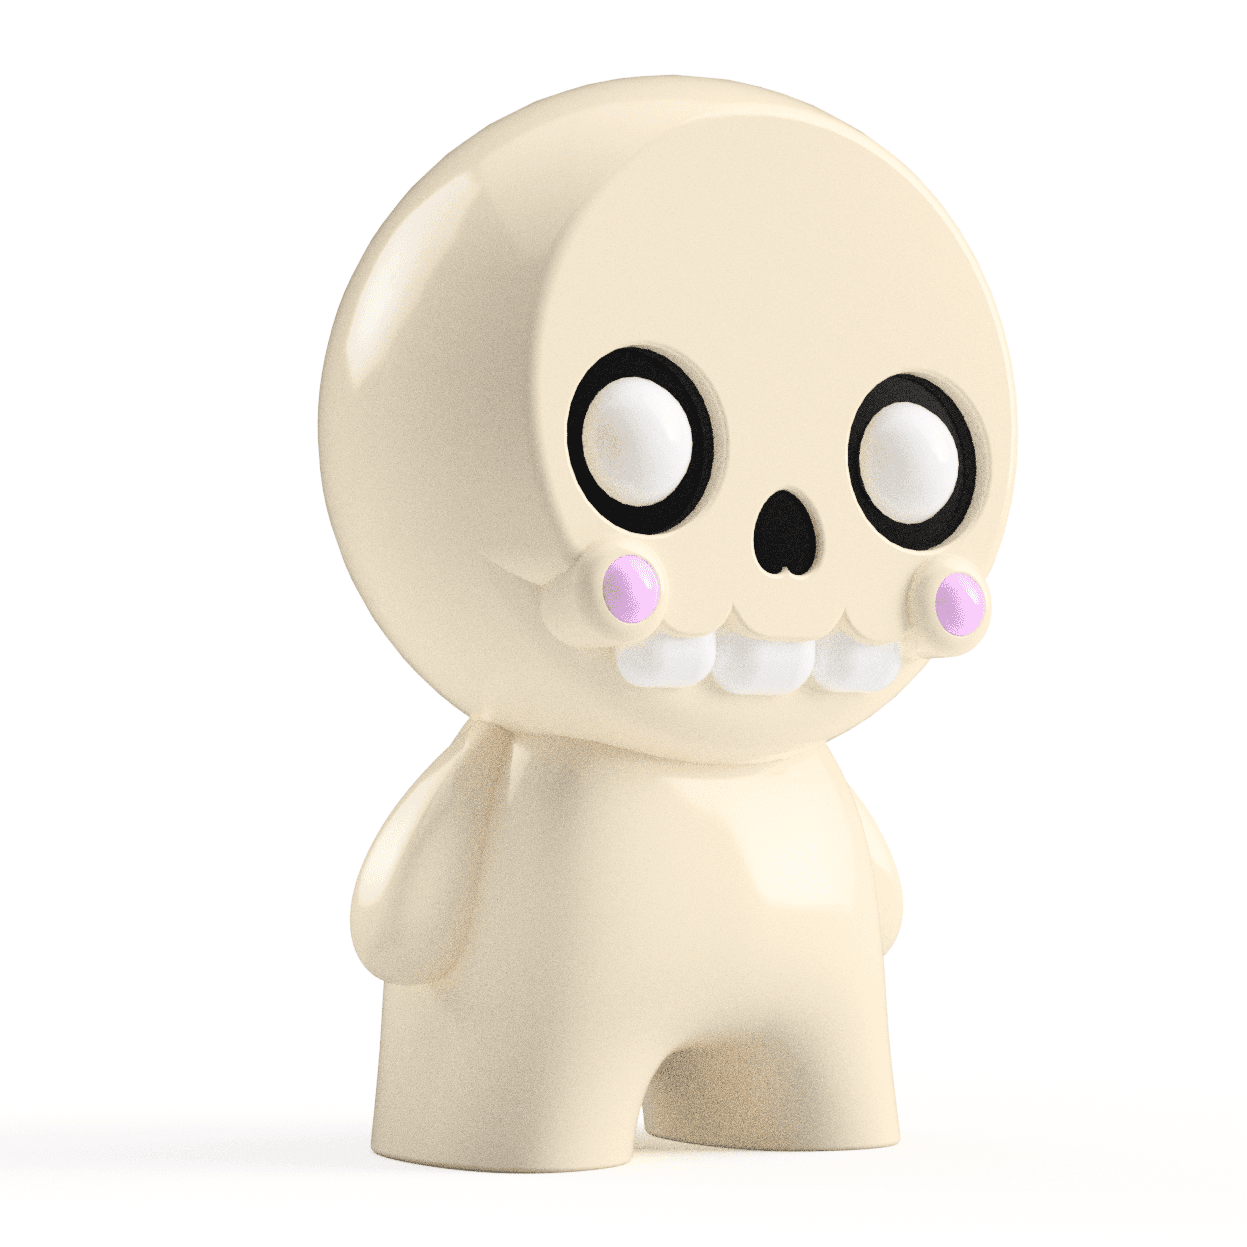 3D Printable Cute Bonehead Skeleton Figure STL - Ideal for Personal & Commercial Crafting 3d model